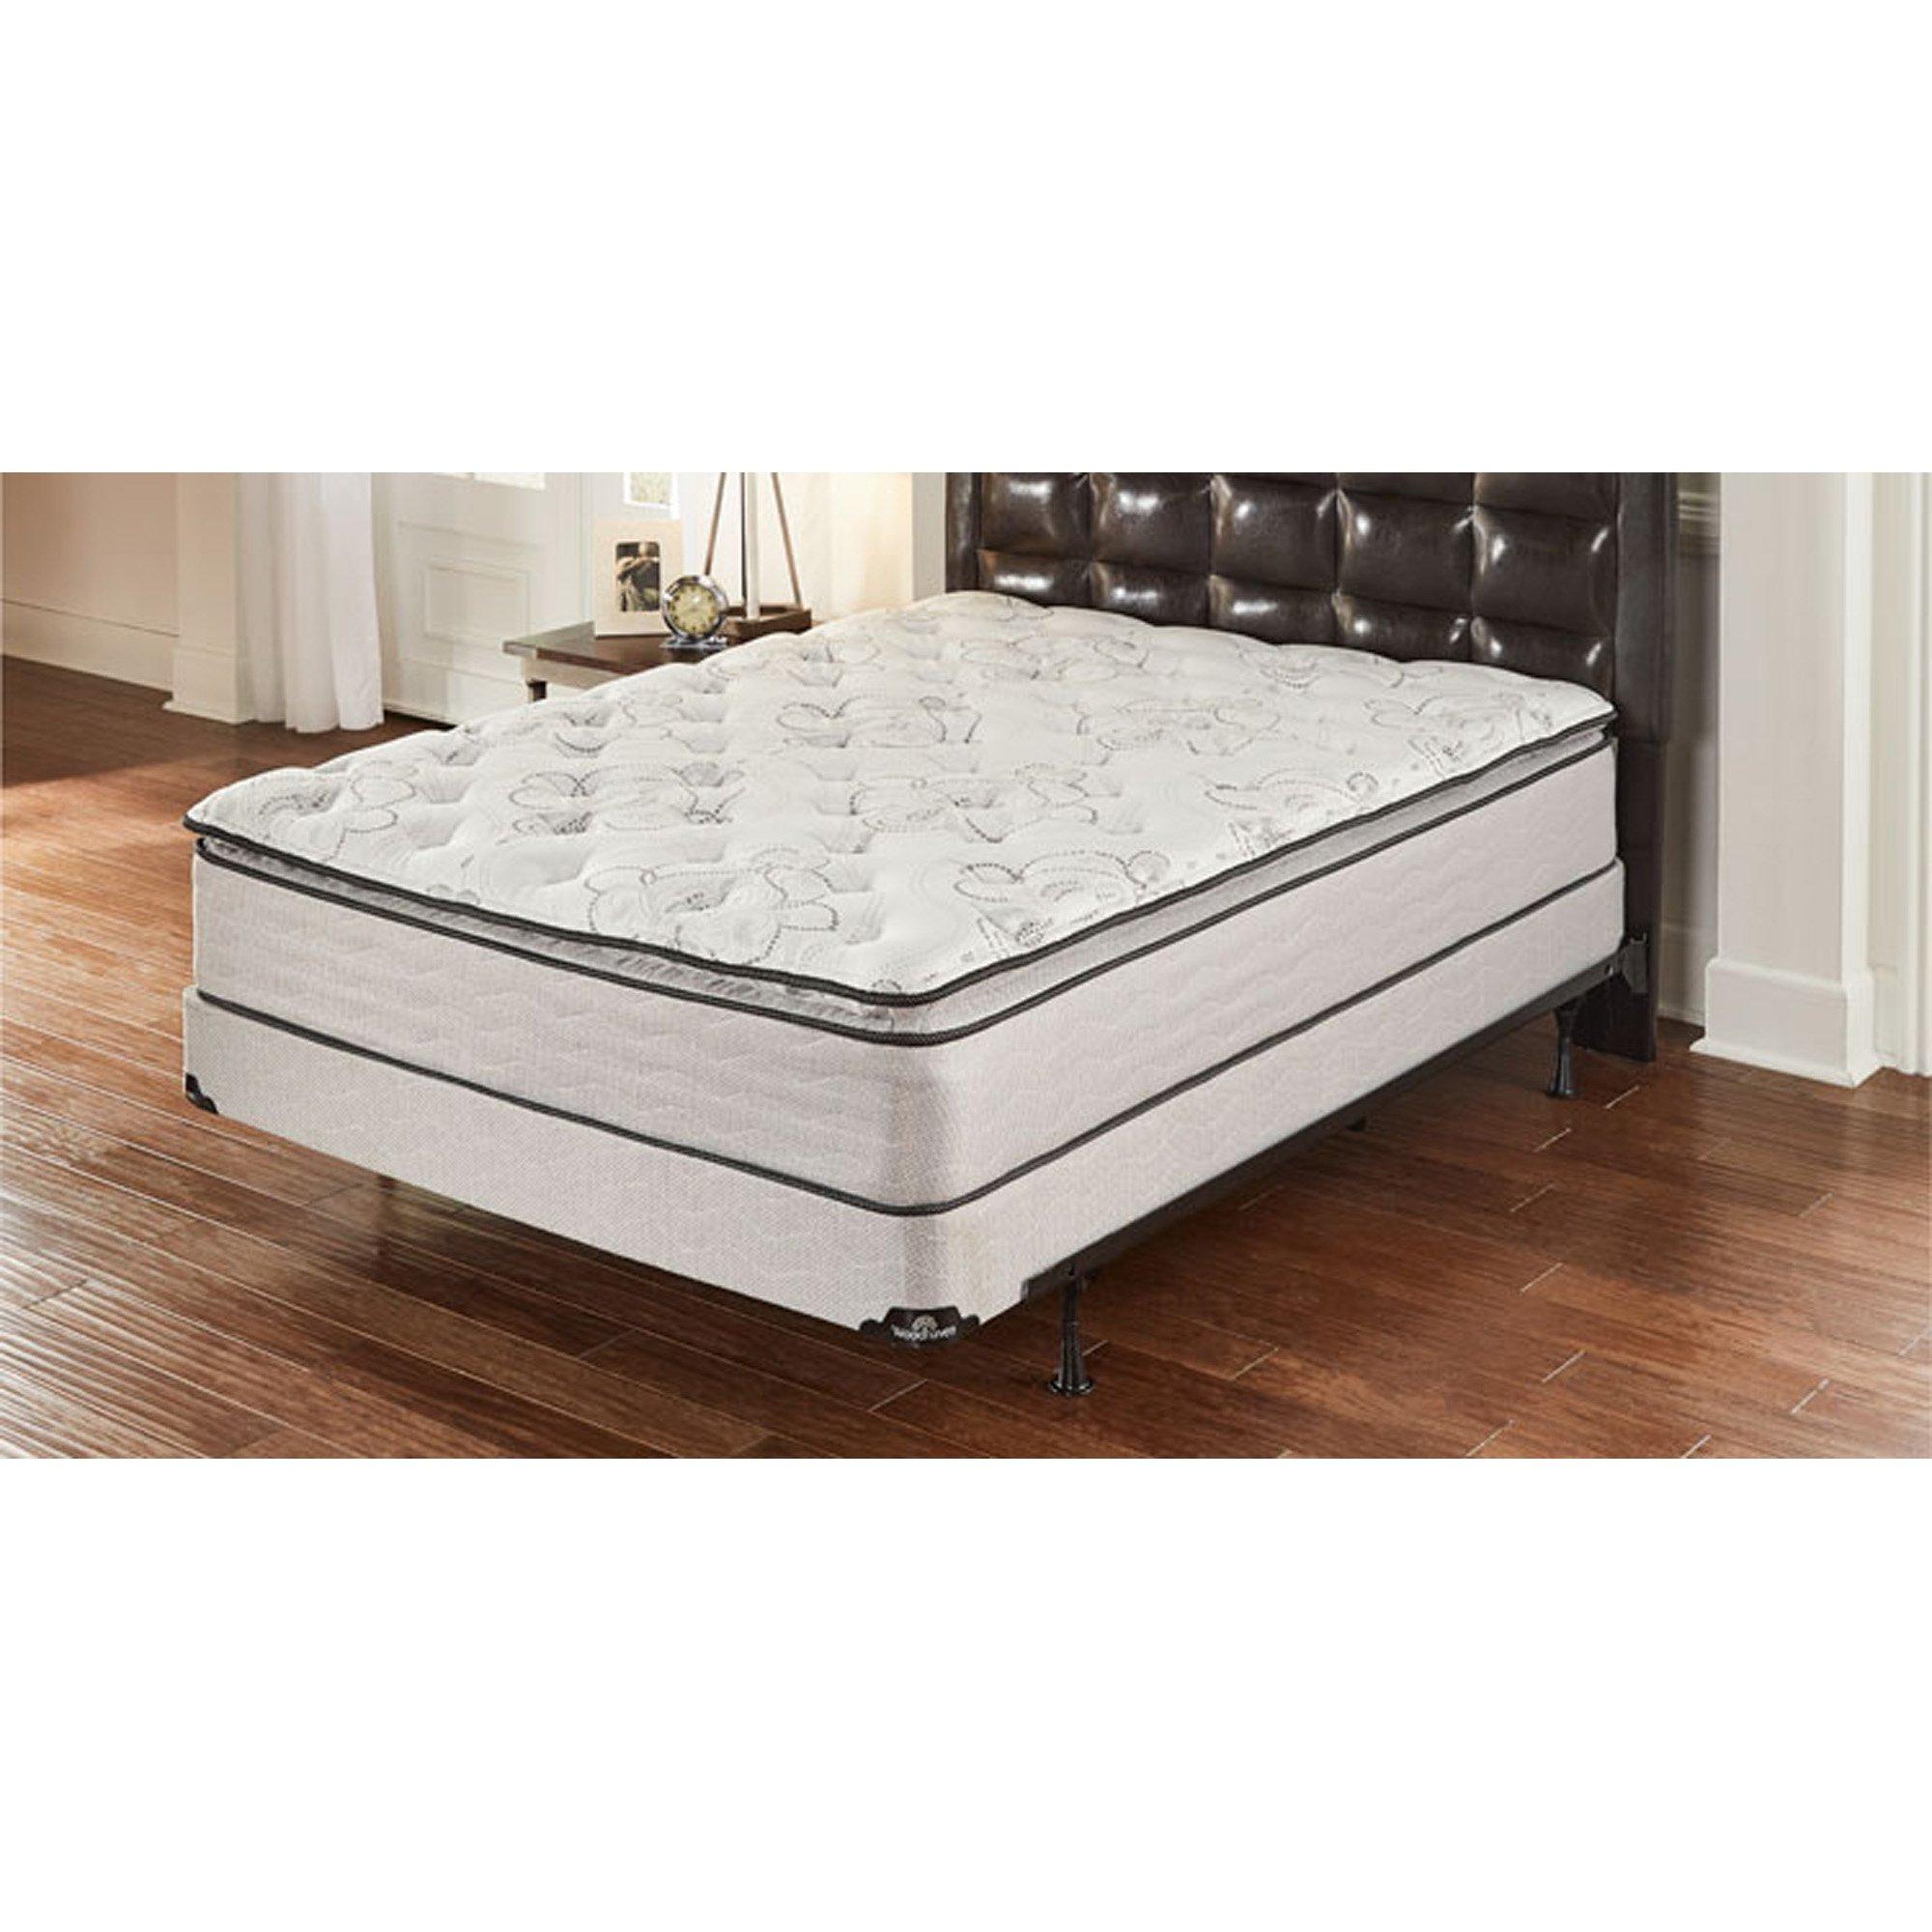 Rent to Own Woodhaven Pillowtop Plush Queen Mattress with 9" Split Foundation and Protectors at